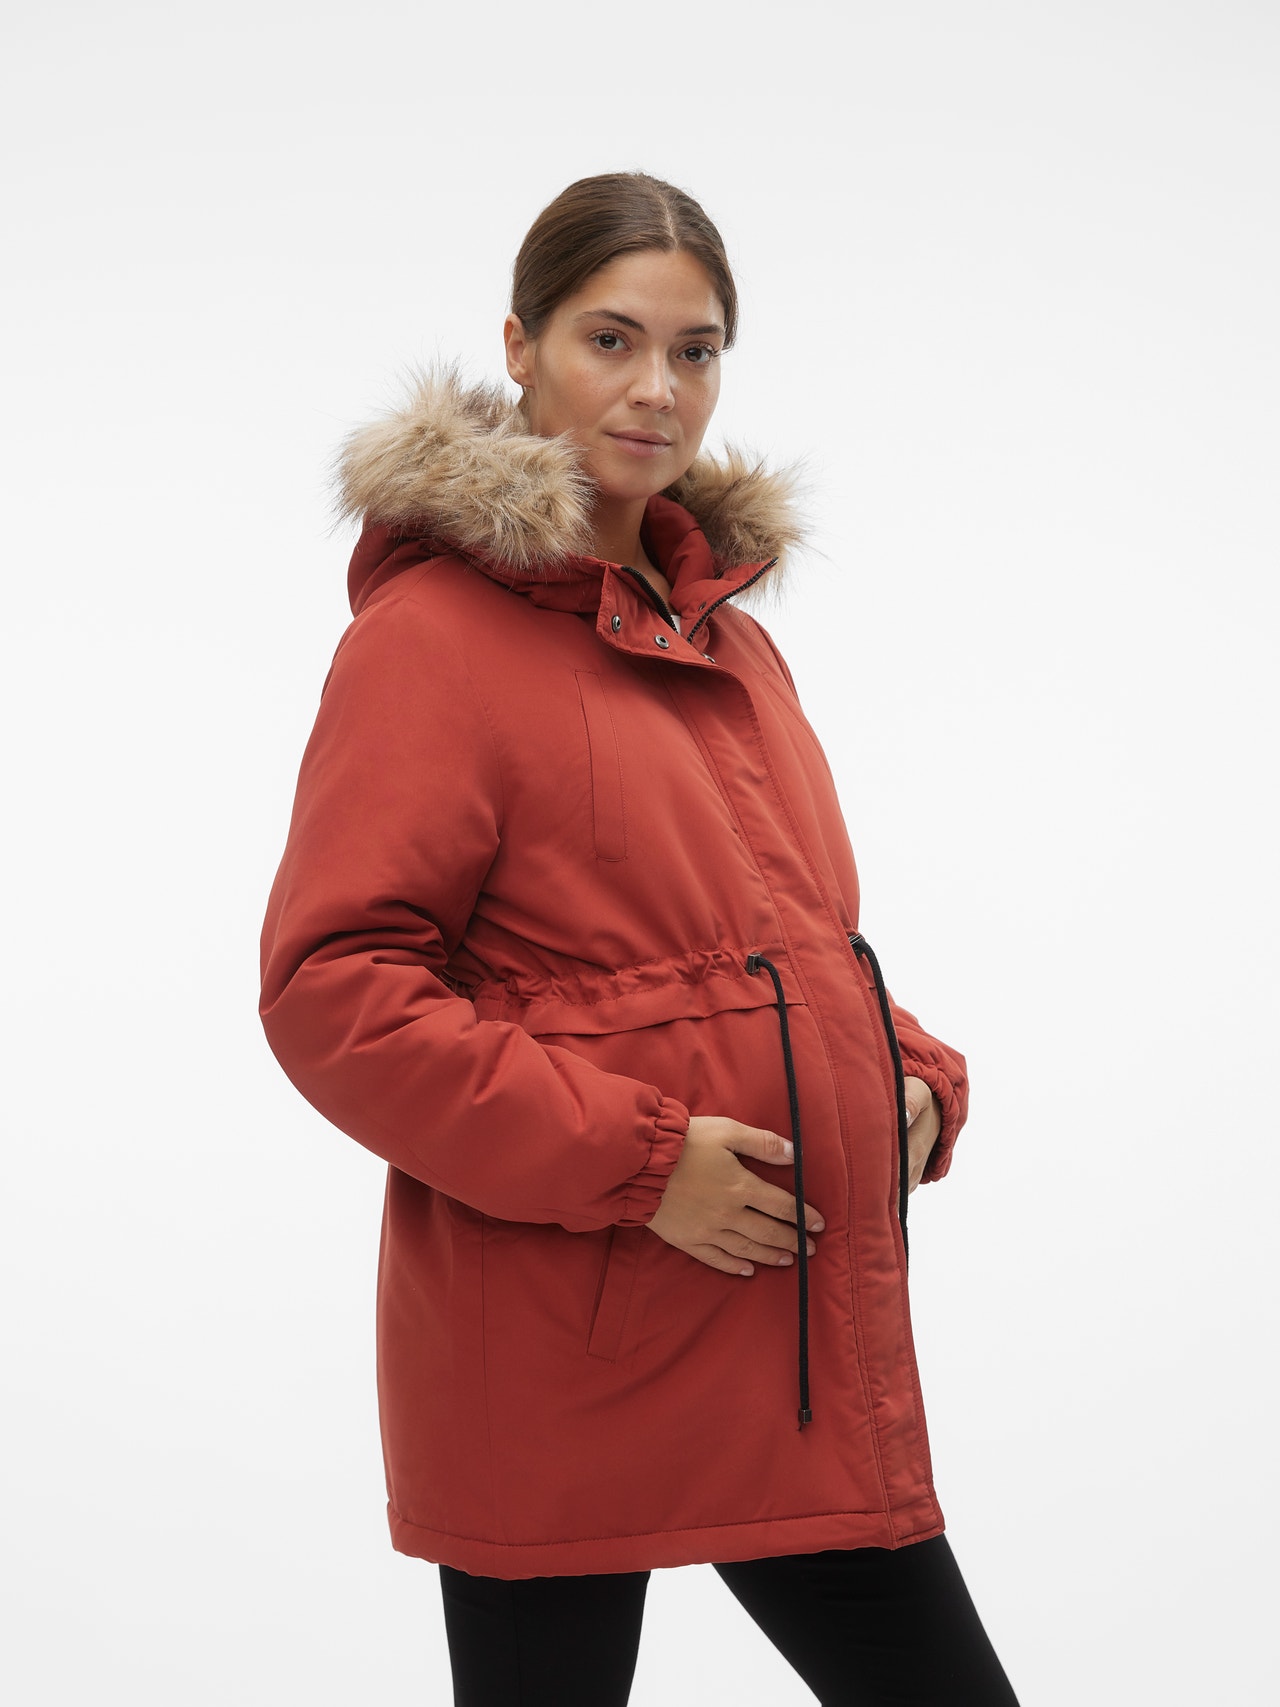 Maternity-jacket with 70% discount!